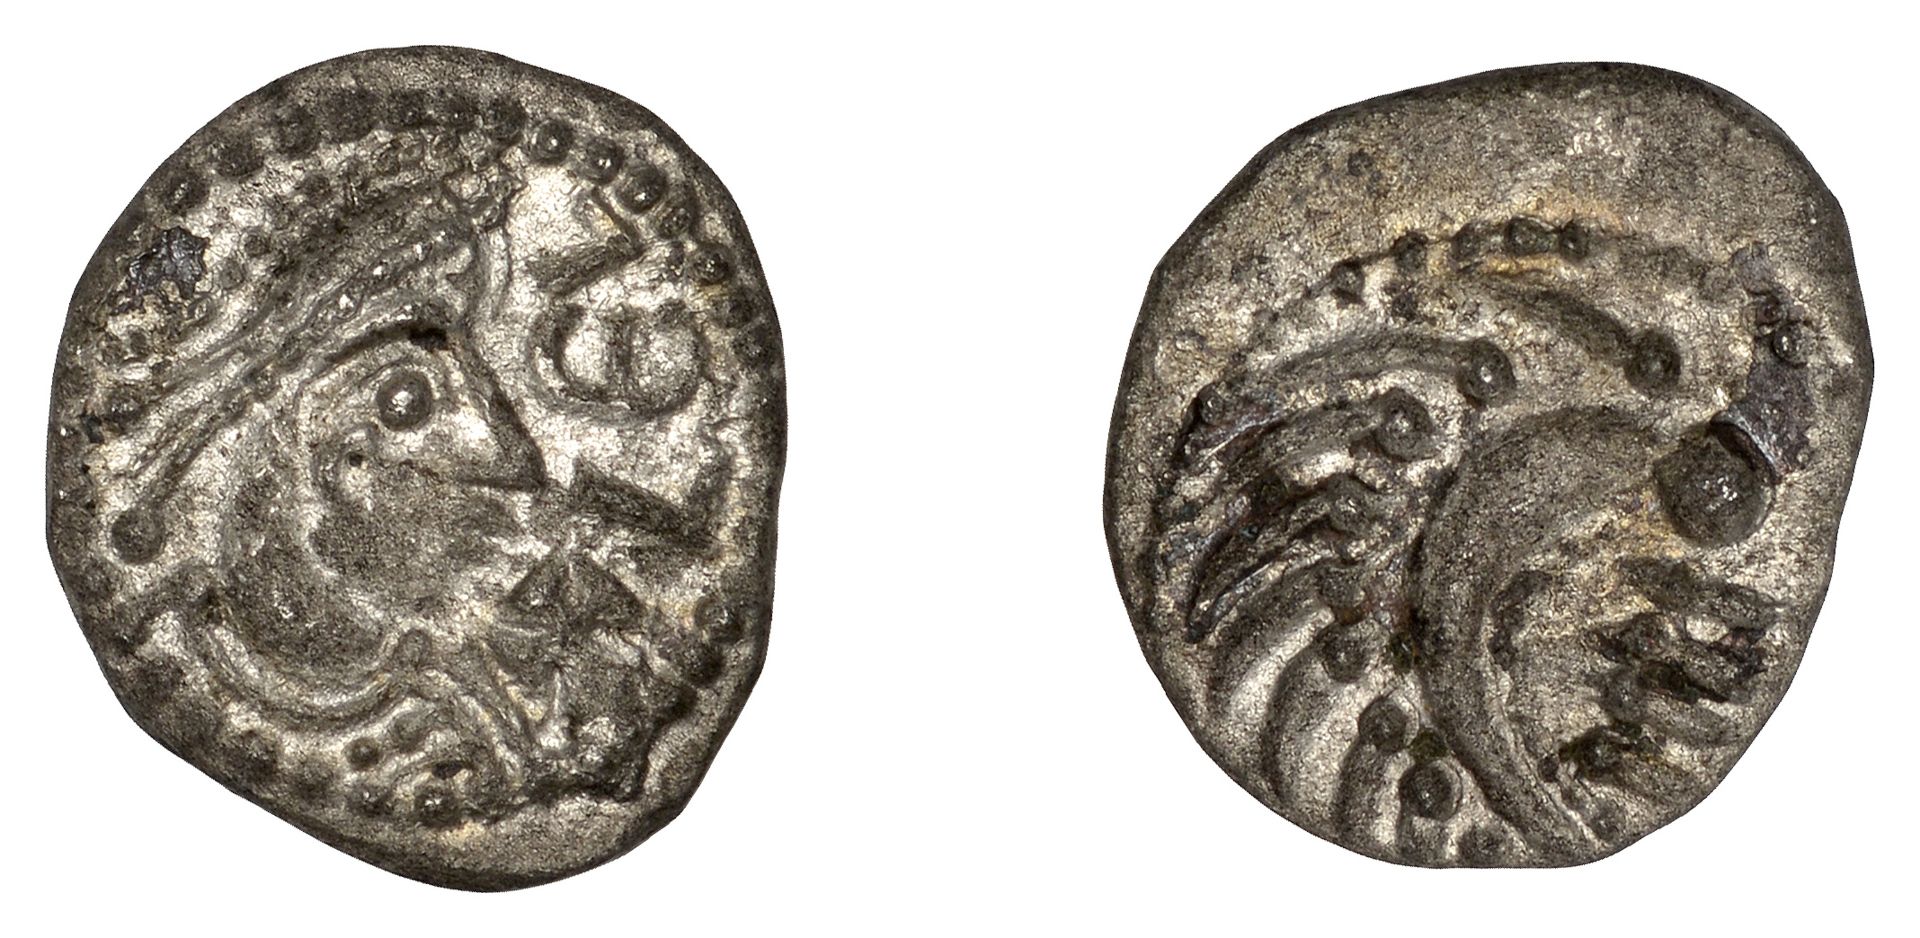 Early Anglo-Saxon Period, Sceatta, Secondary series T, type 9, diademed and draped bust righ...